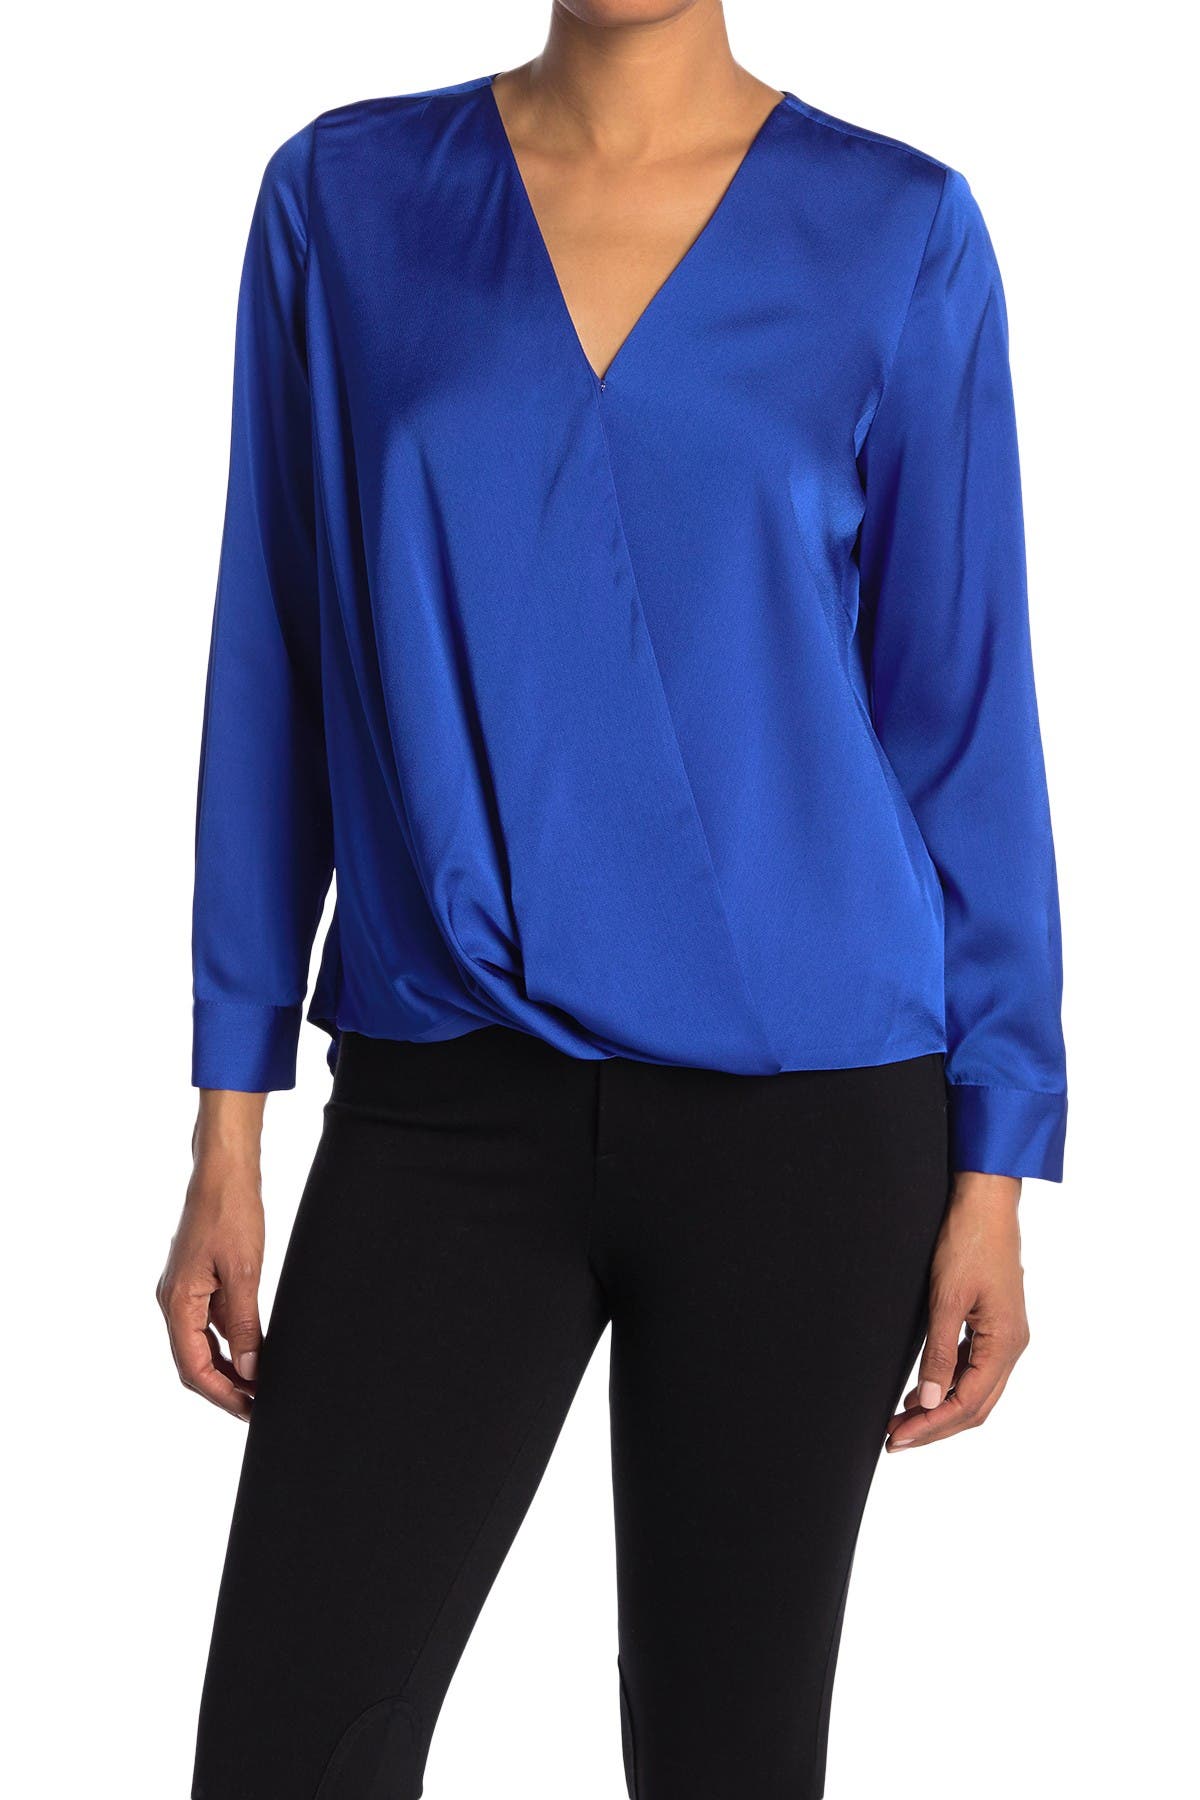 vince camuto blouses nordstrom